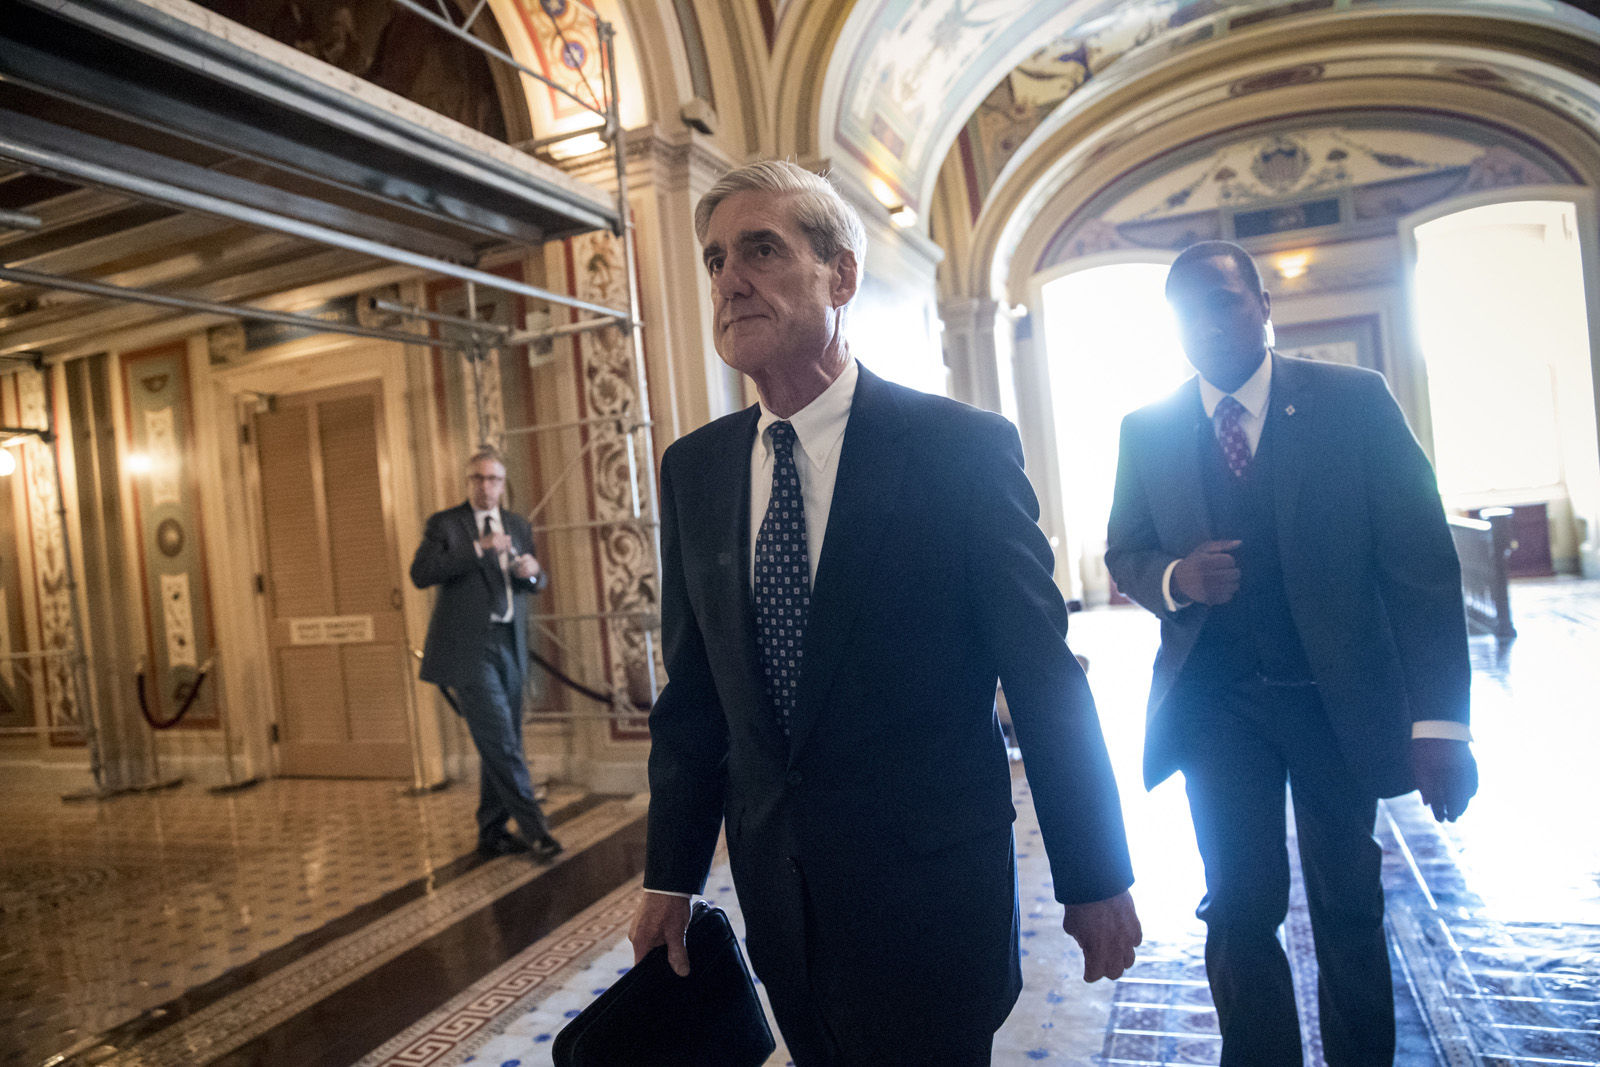 Multiple media outlets are reporting that Special Counsel Robert Muller team has filed its first charges against at least one person in its investigation of Russian meddling in the 2016 election. FILE. (AP Photo/J. Scott Applewhite, File)